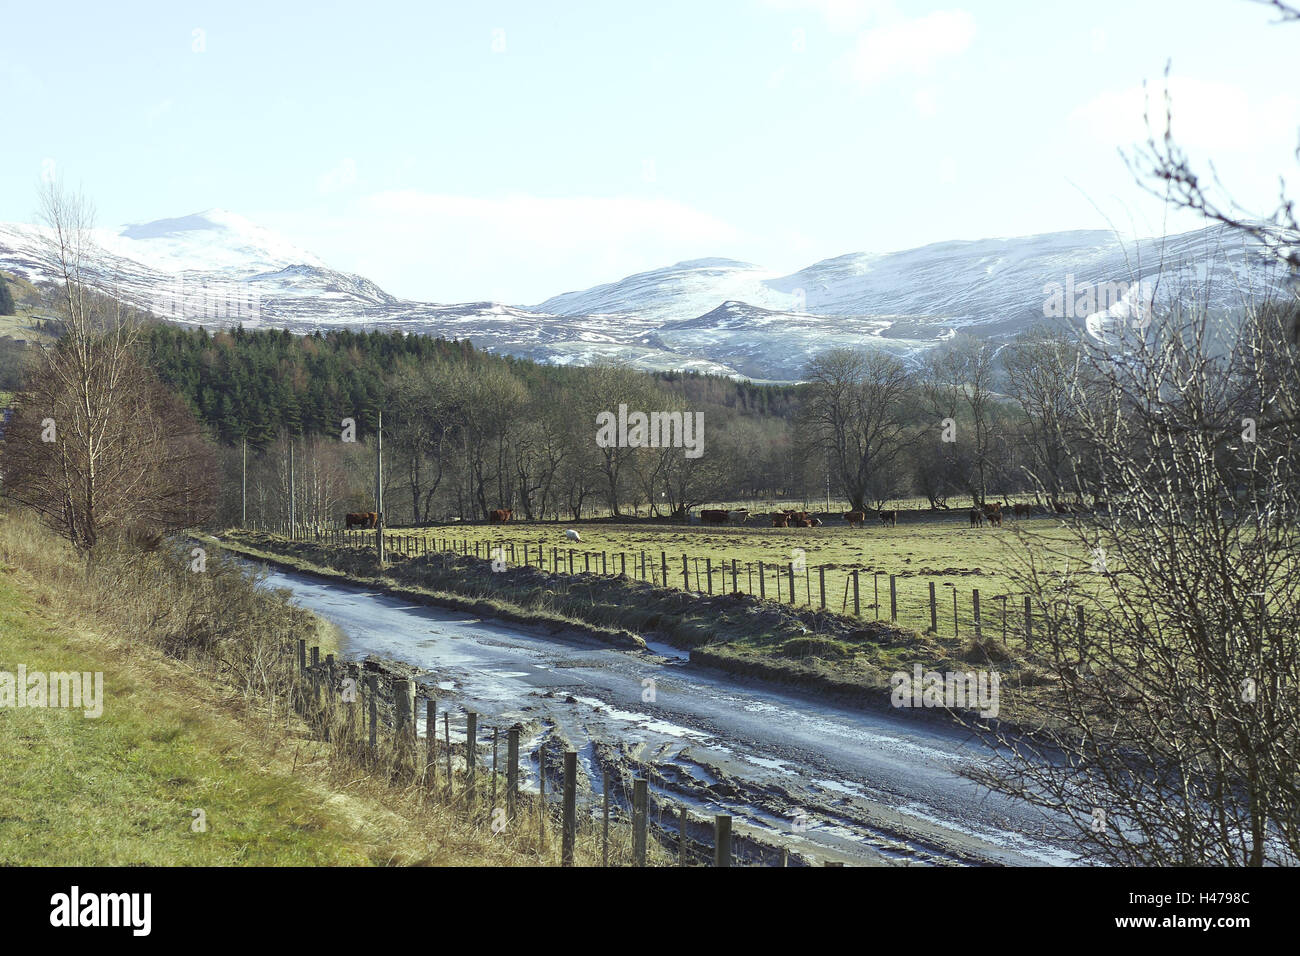 Scotland, Inverness, way, scenery, pasture, winter, panorama, winter, wildly, earthy, rough, snow, mountains, snow-covered, quietly, outside, to travel, place of interest, vacation, tourism, nobody, Stock Photo